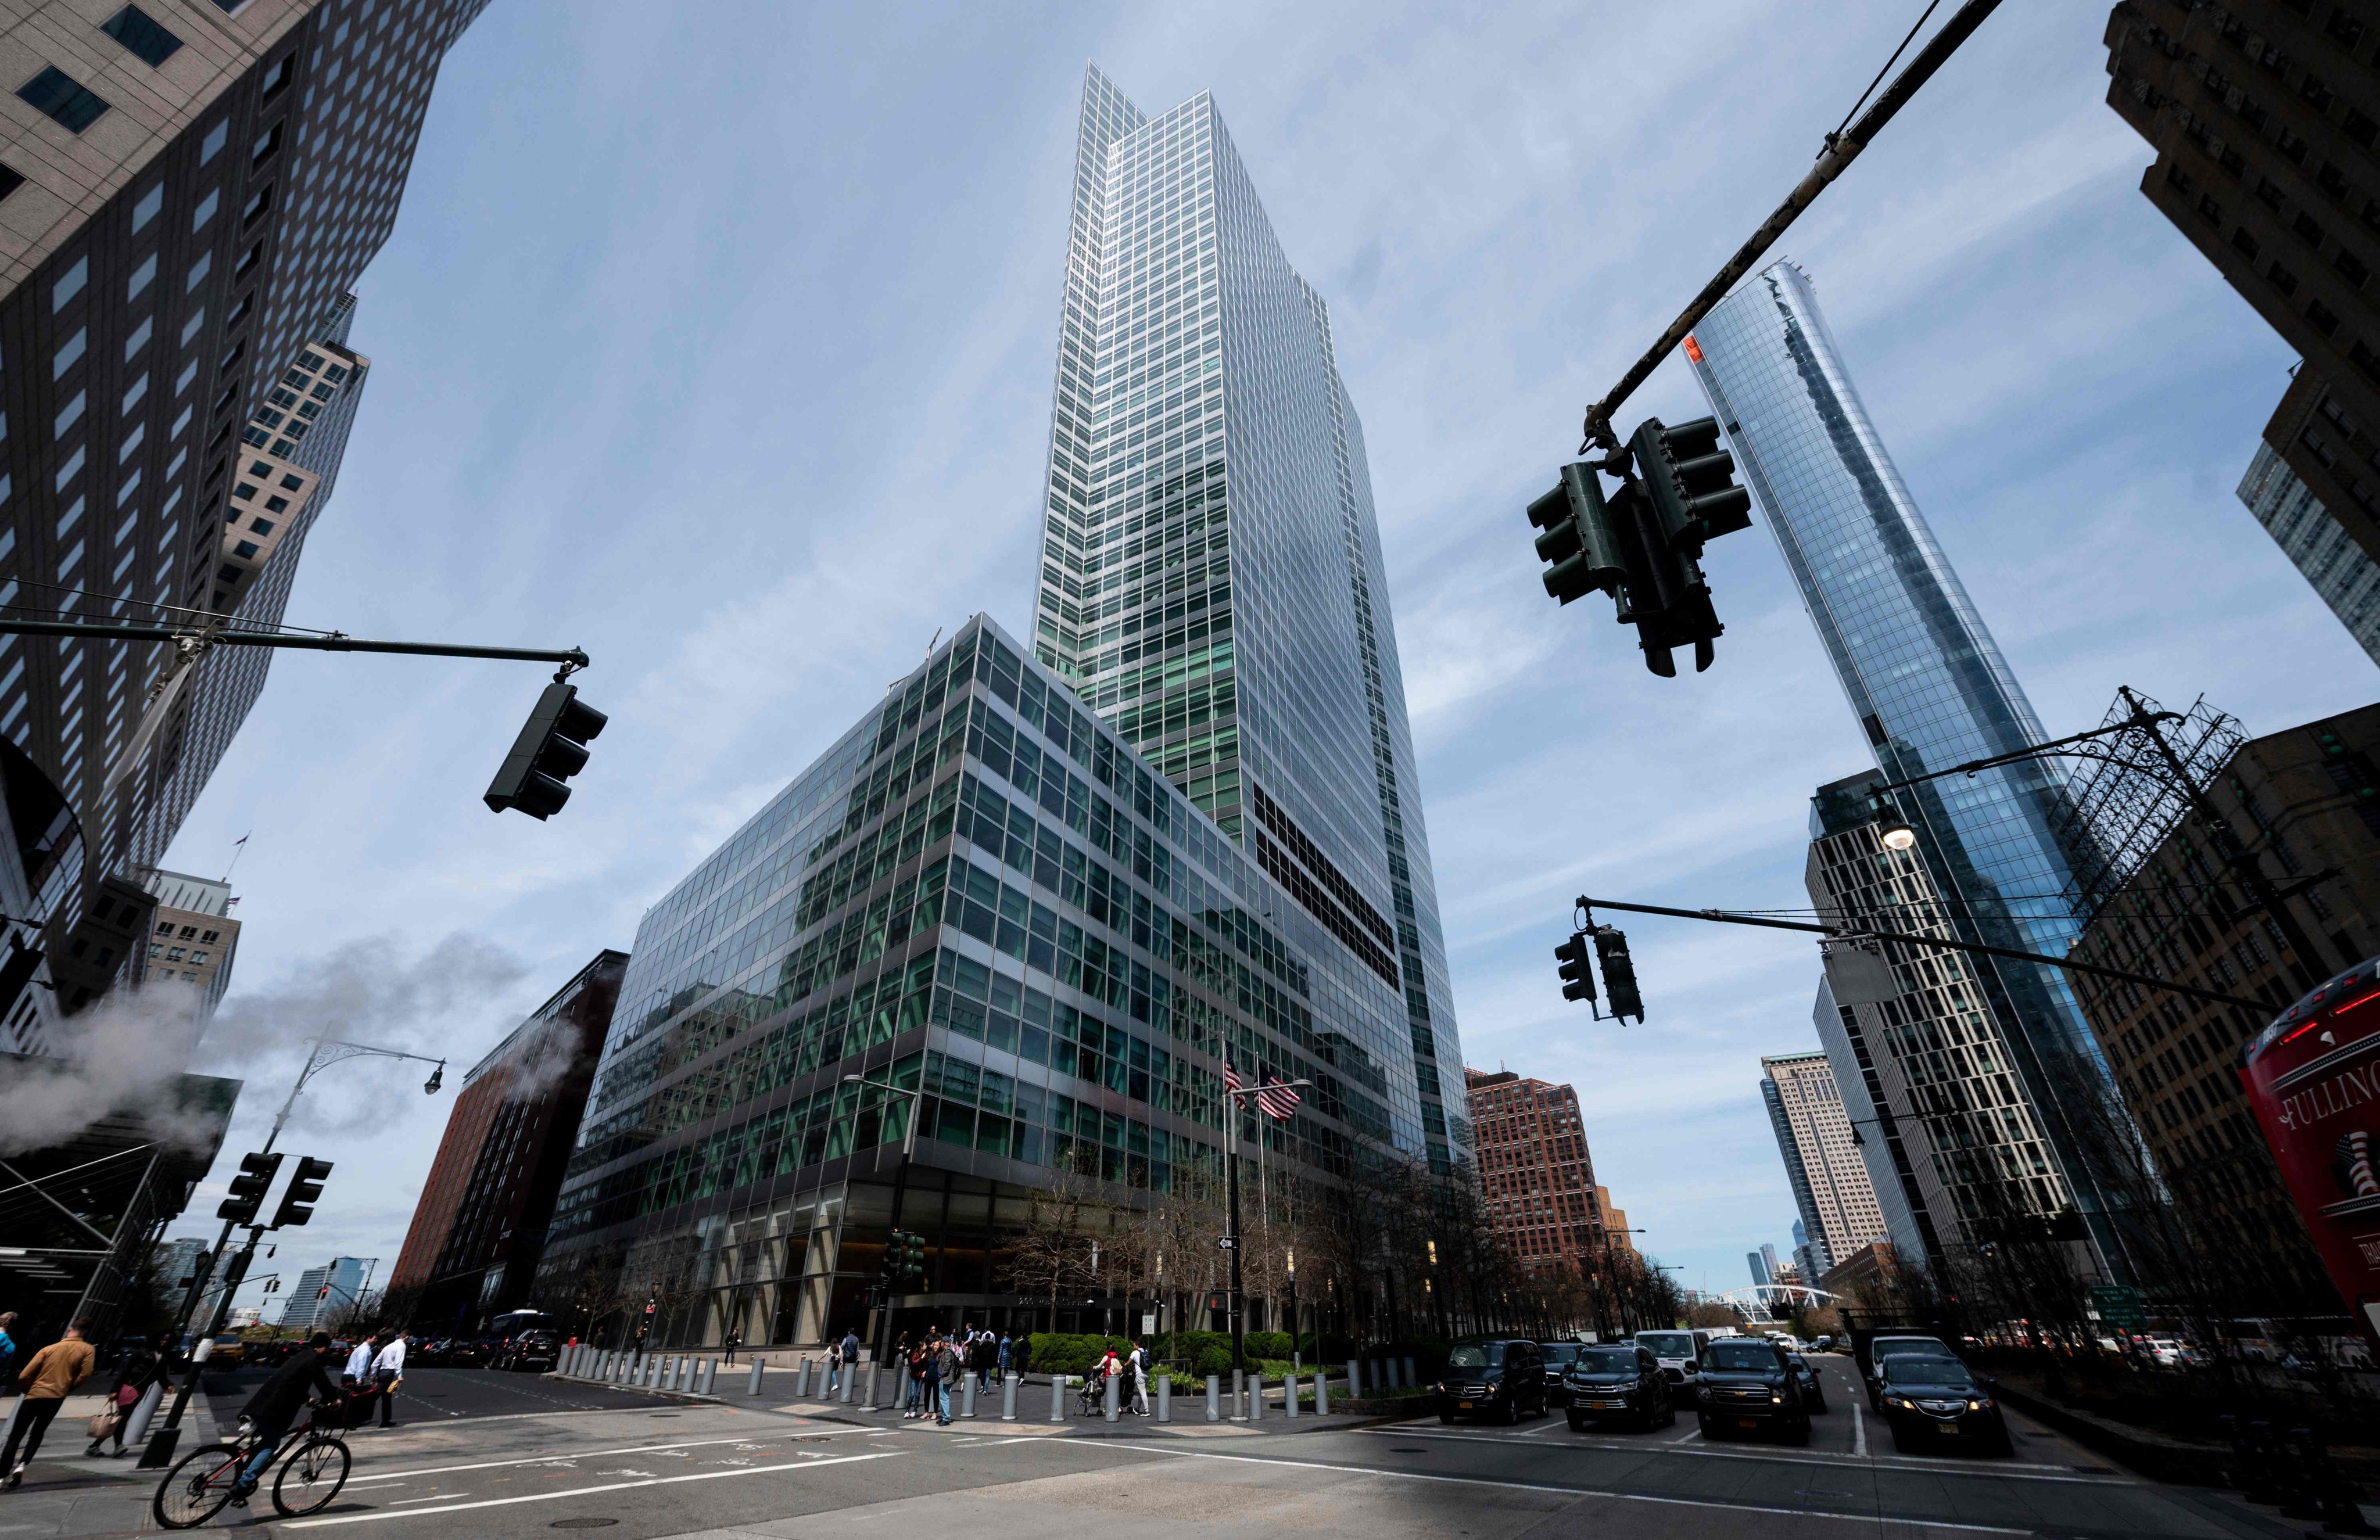 The headquarters of Goldman Sachs in New York City. Photo: AFP